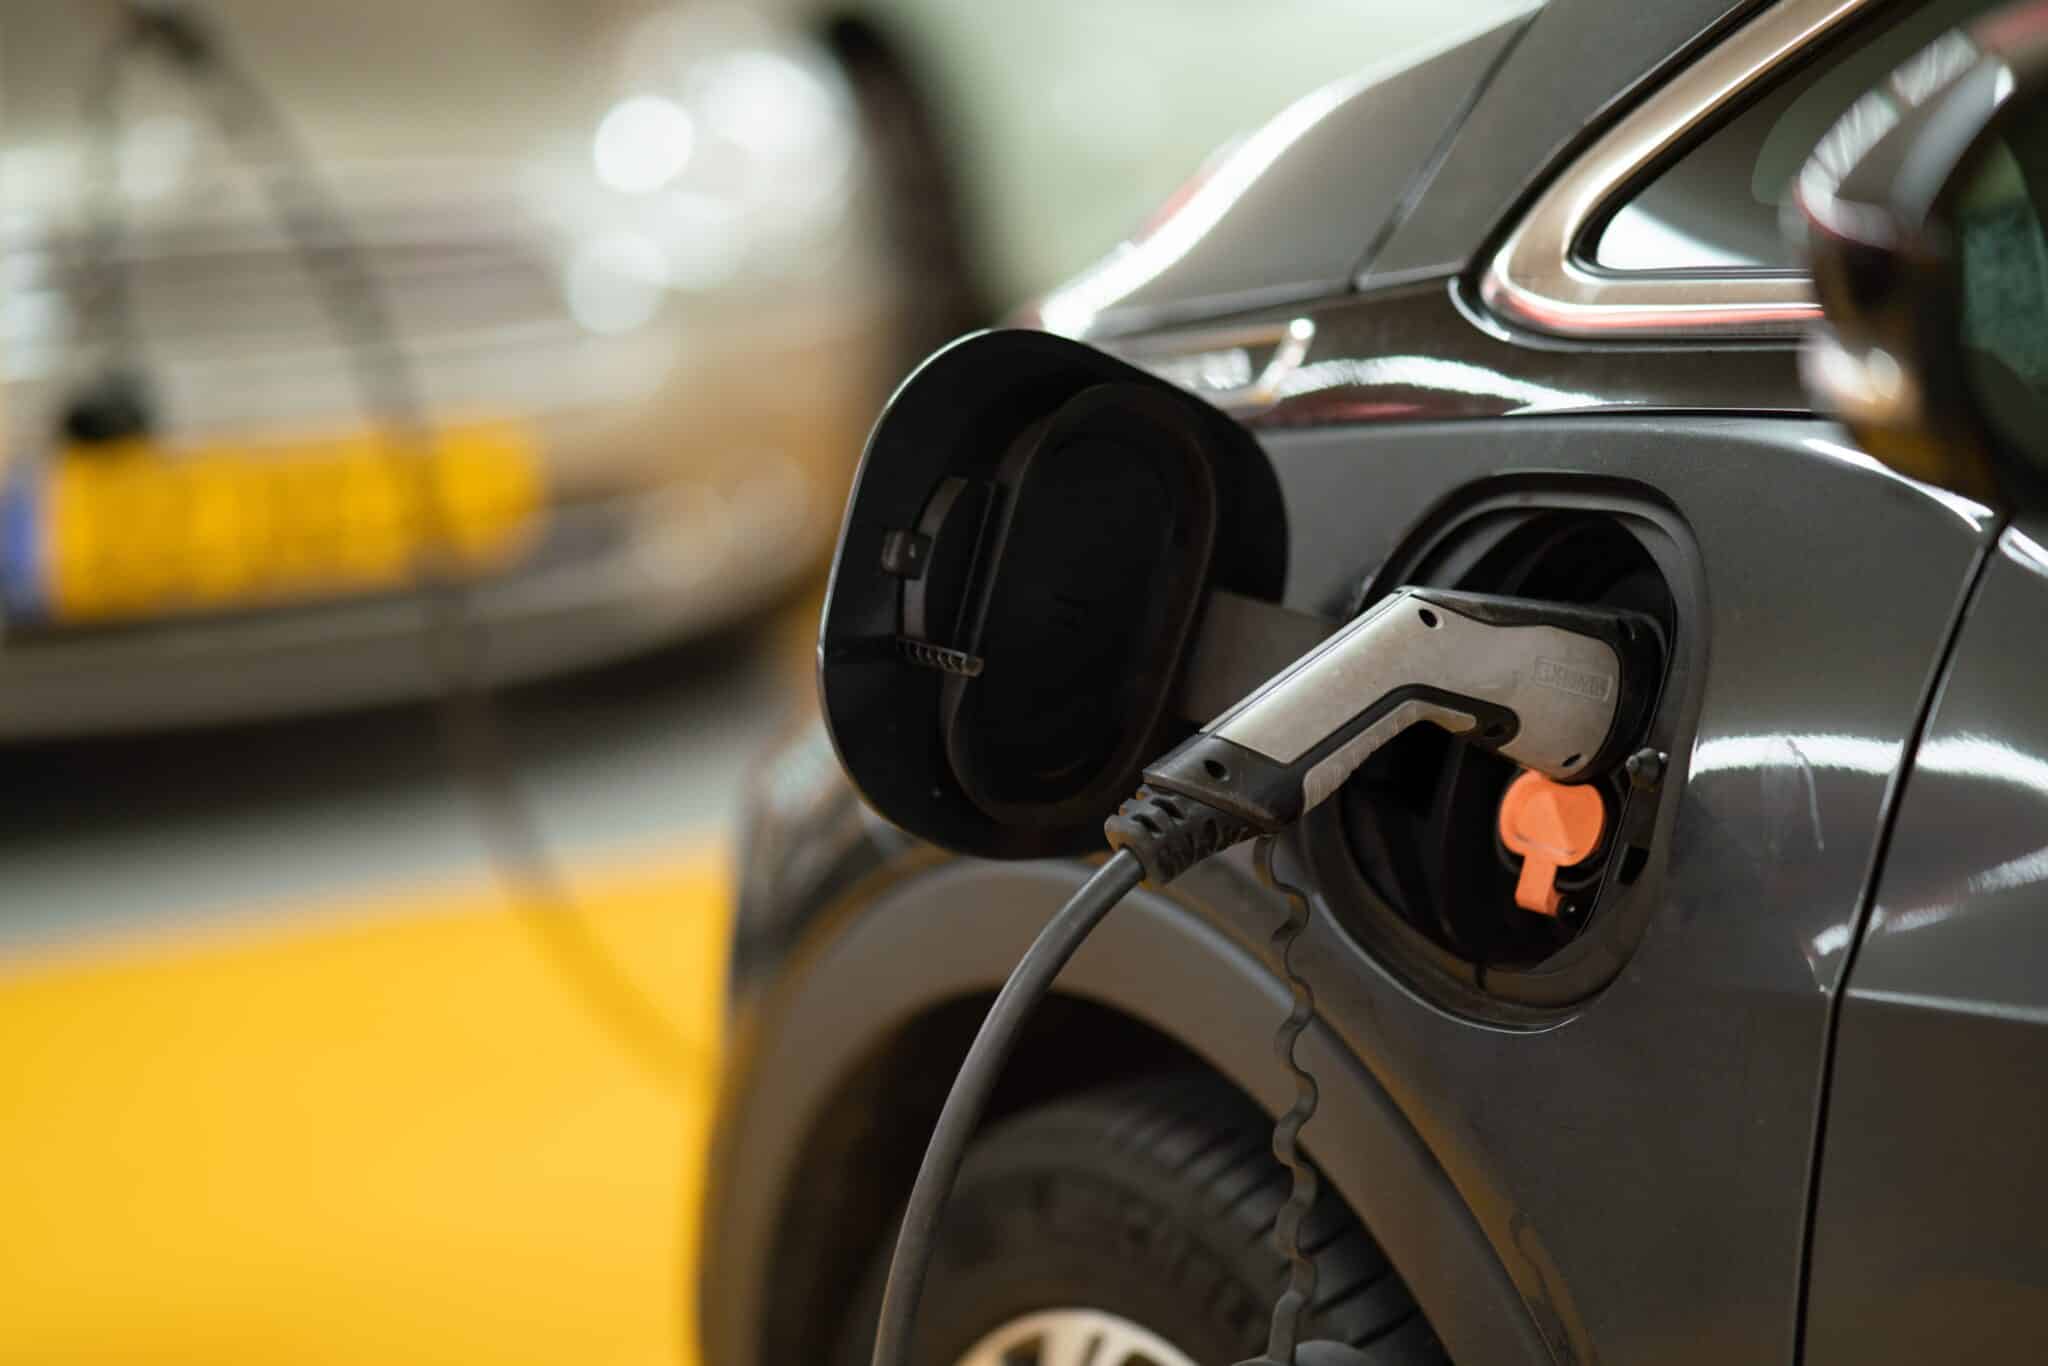 EV chargers are included in the IA sales tax exemption